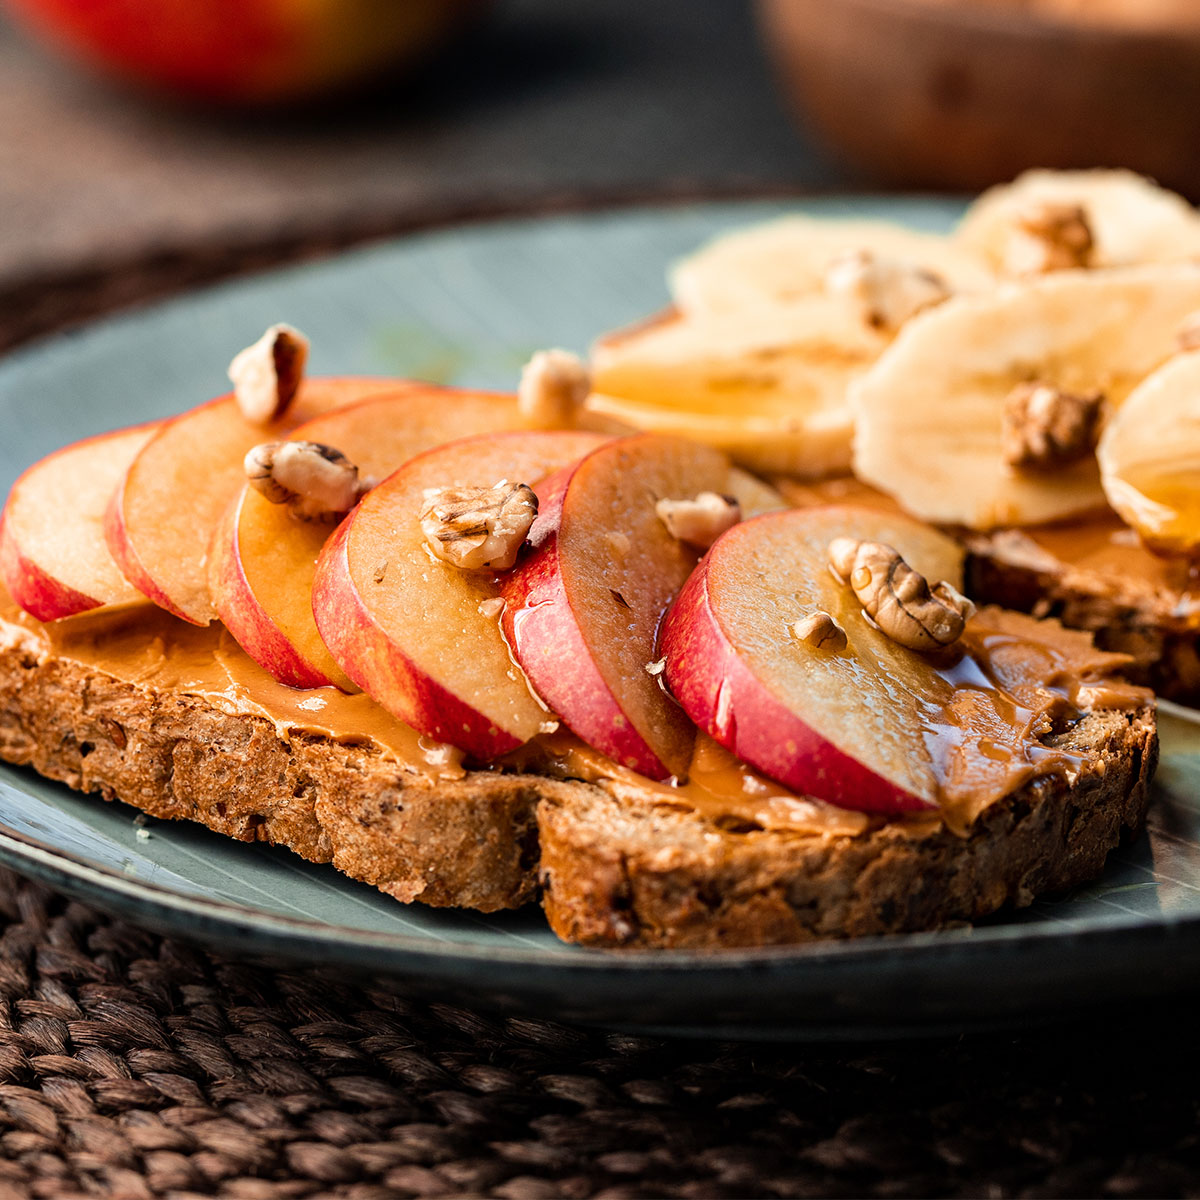 toast topped with peanut butter and apple slices